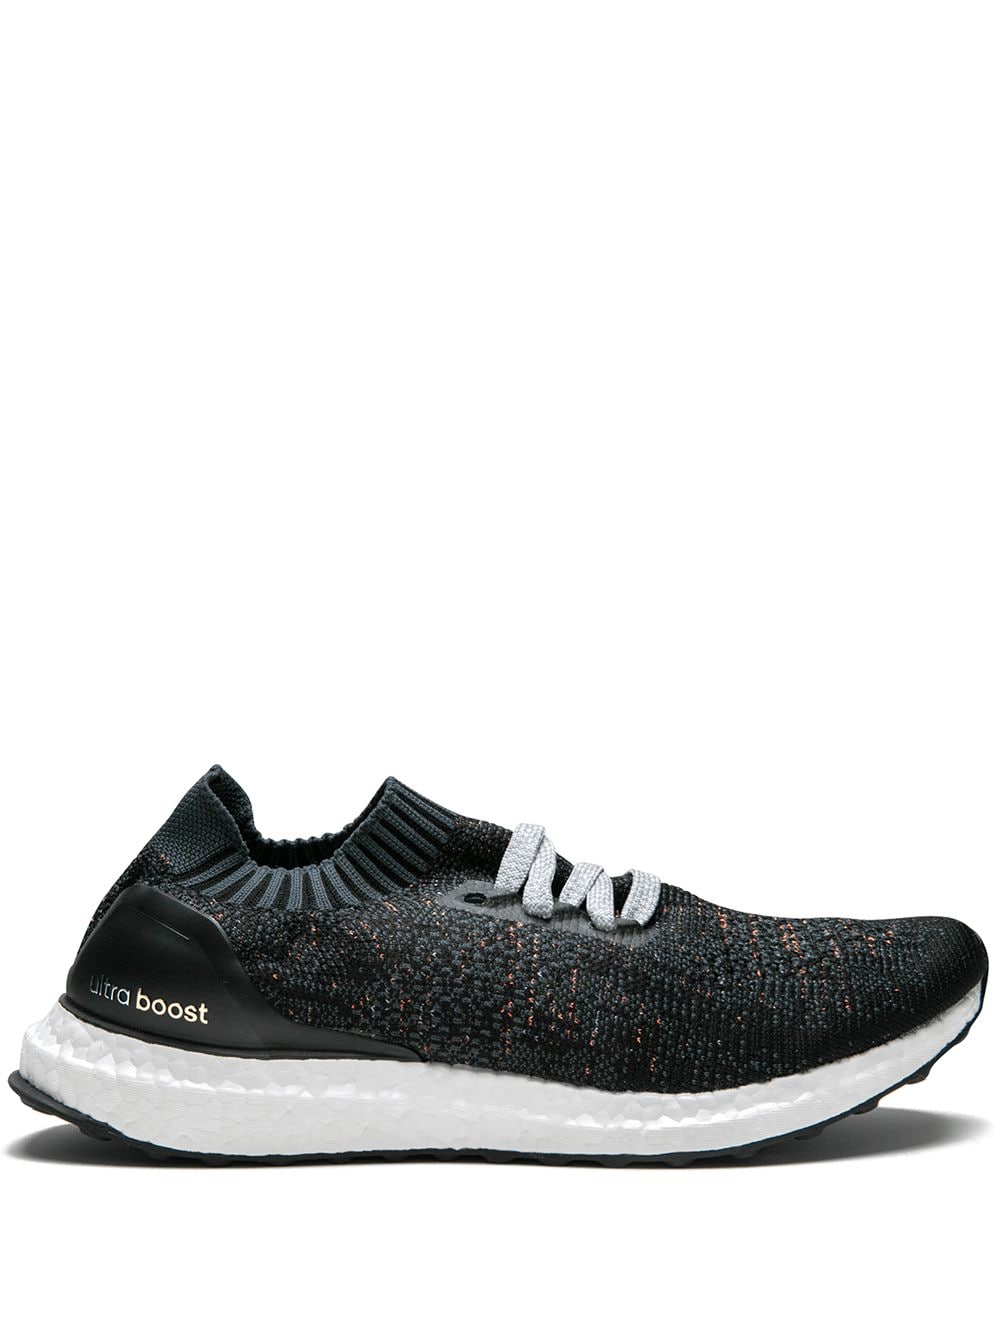 adidas ultra boost uncaged